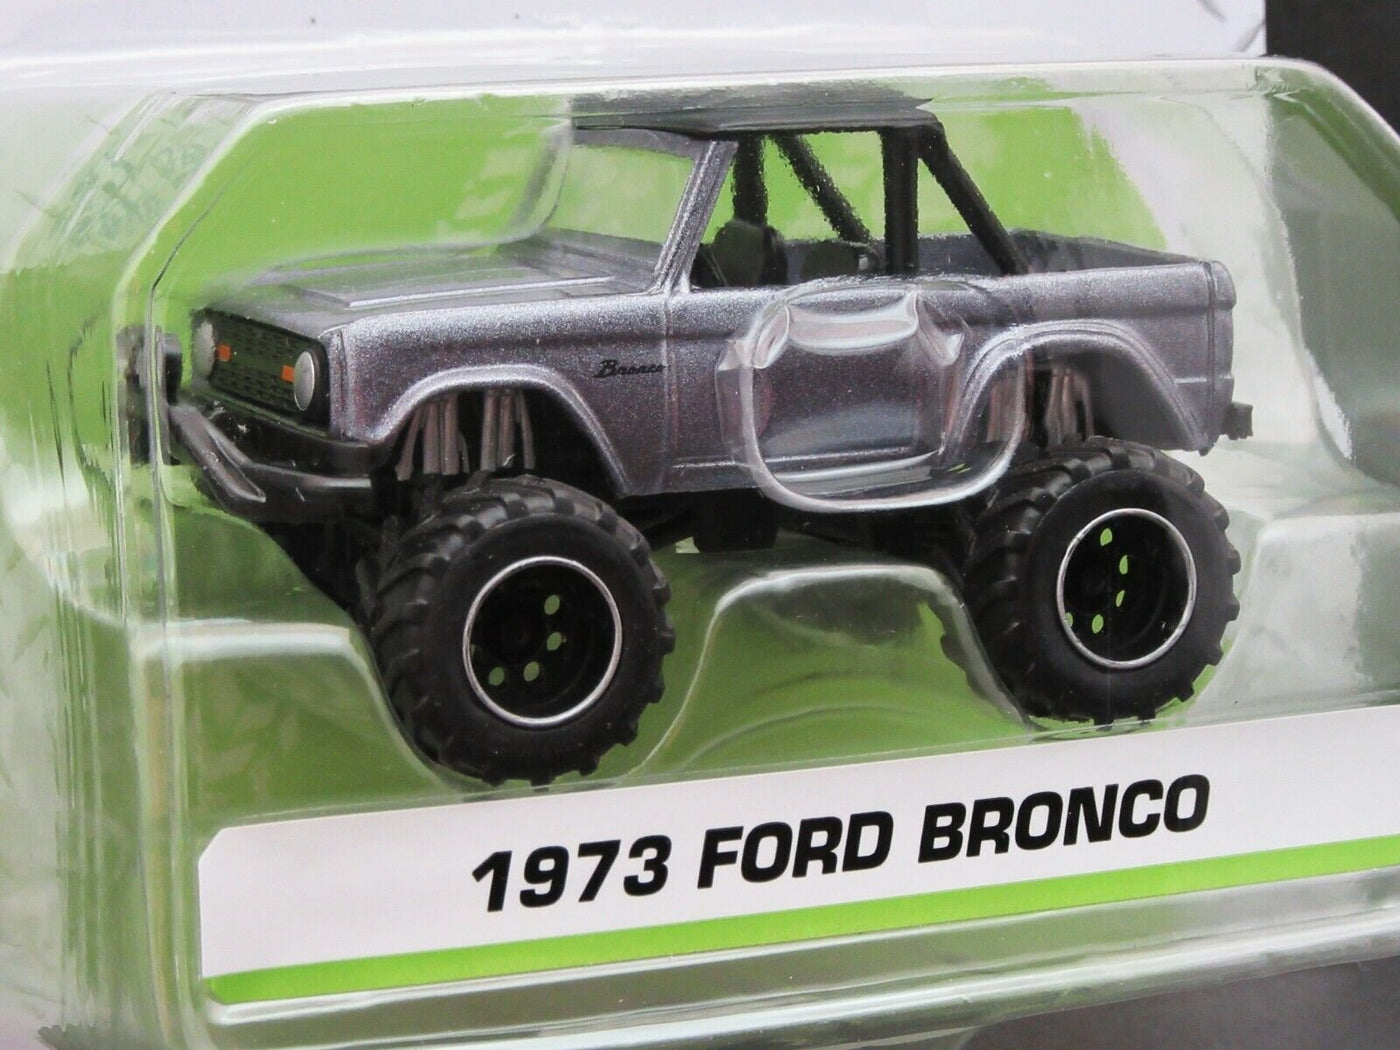 1973 Ford Bronco ~ Silver Convertible ~ Die Cast Metal ~ 1:57 Scale Just Trucks